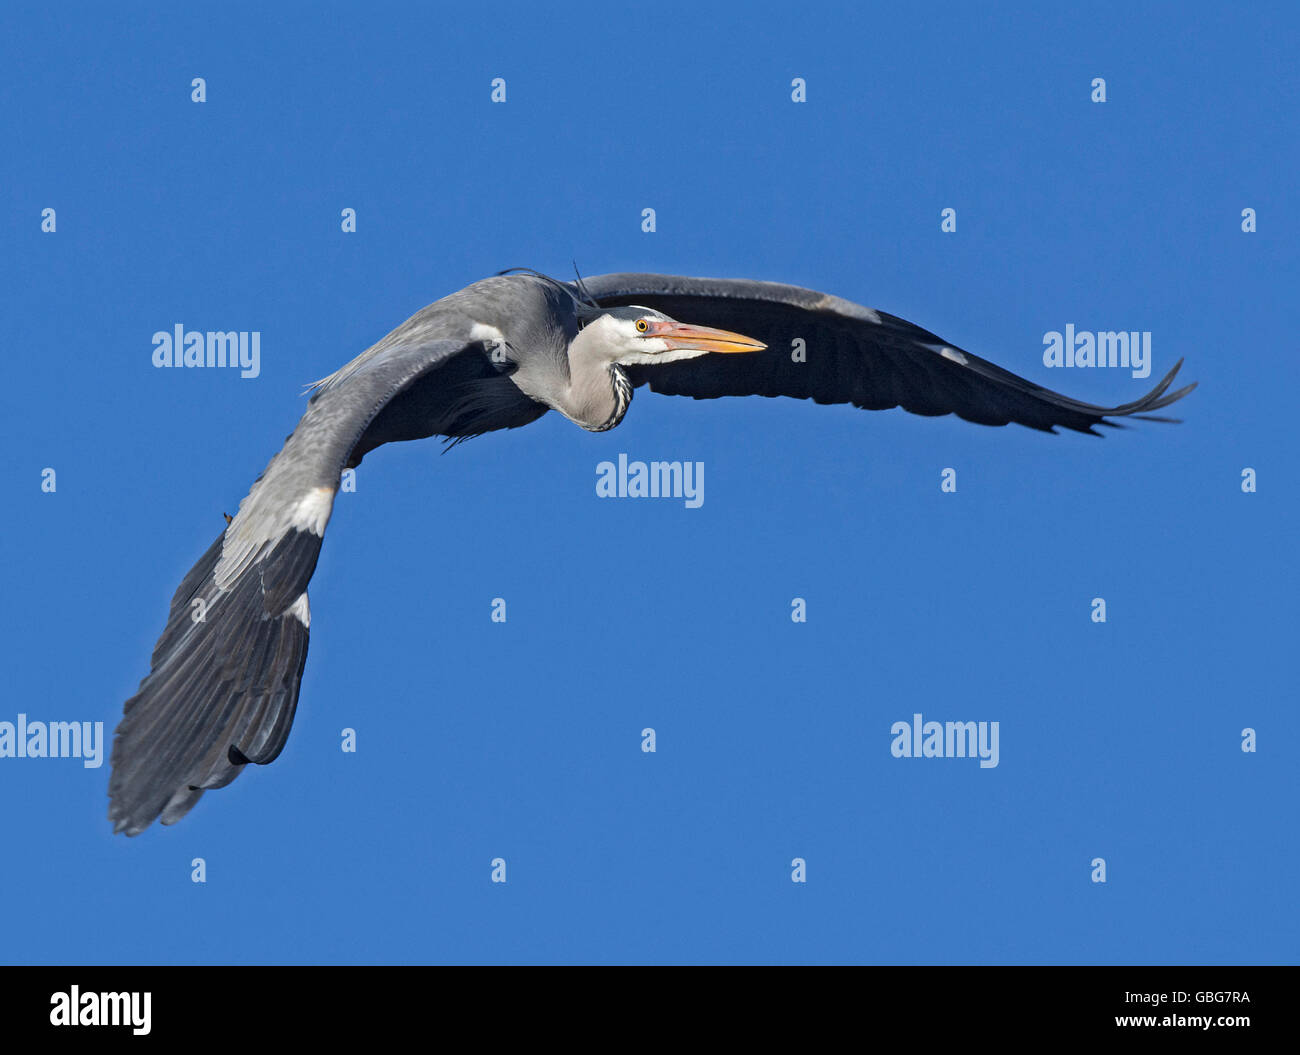 Grey Heron (Ardea cinerea) flying, view from front, Blackpool, UK Stock Photo